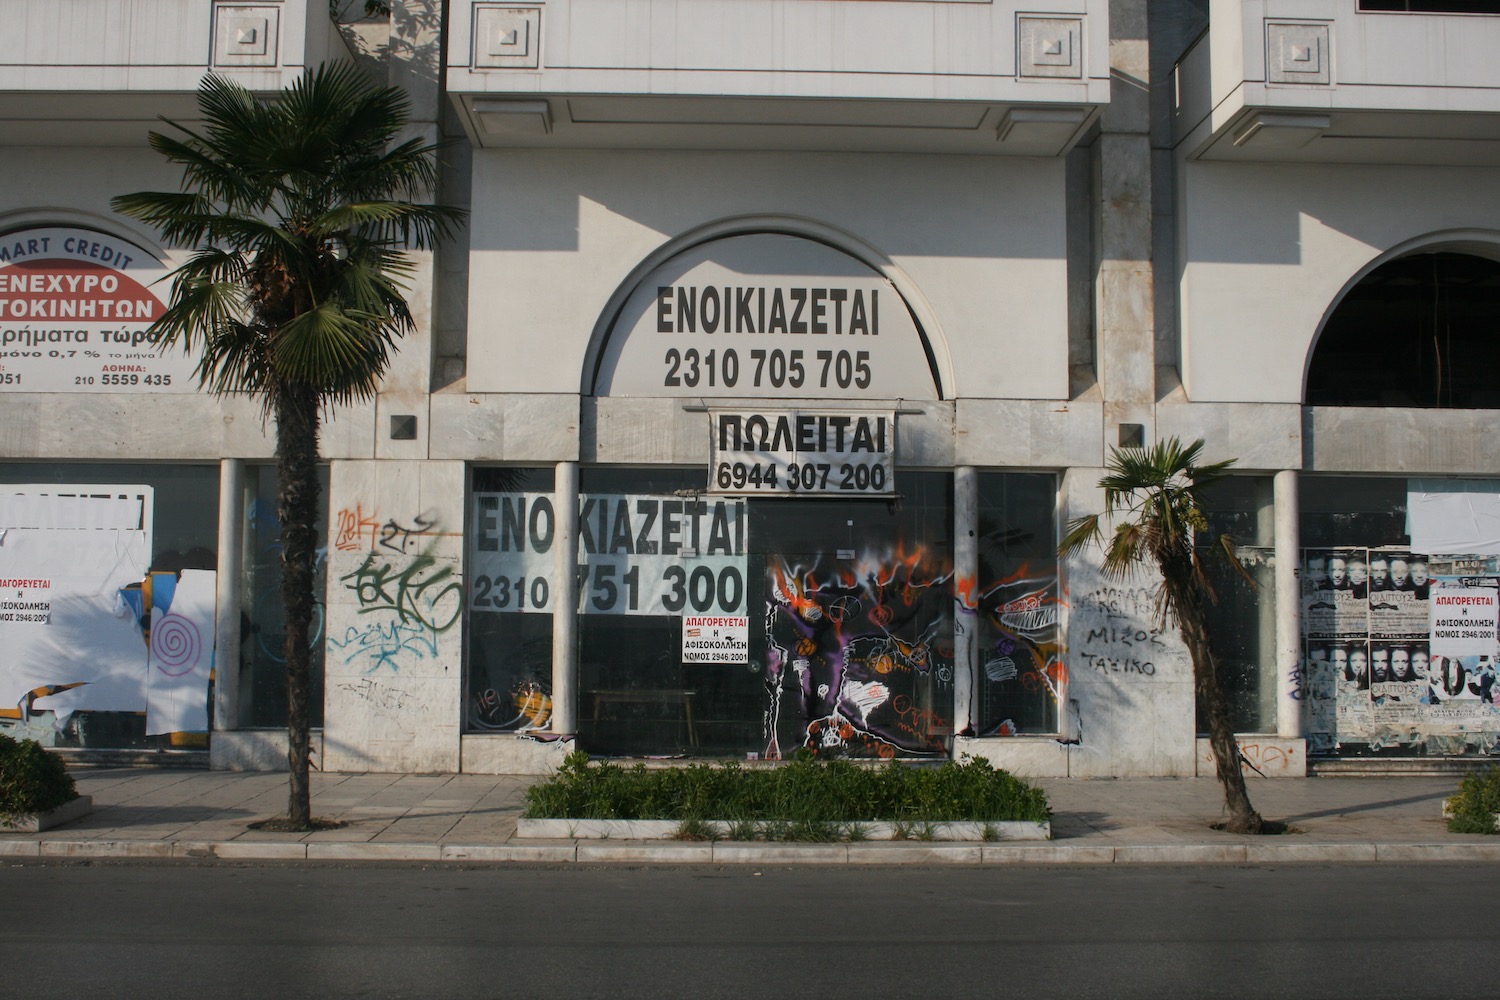 a building with graffiti on the front